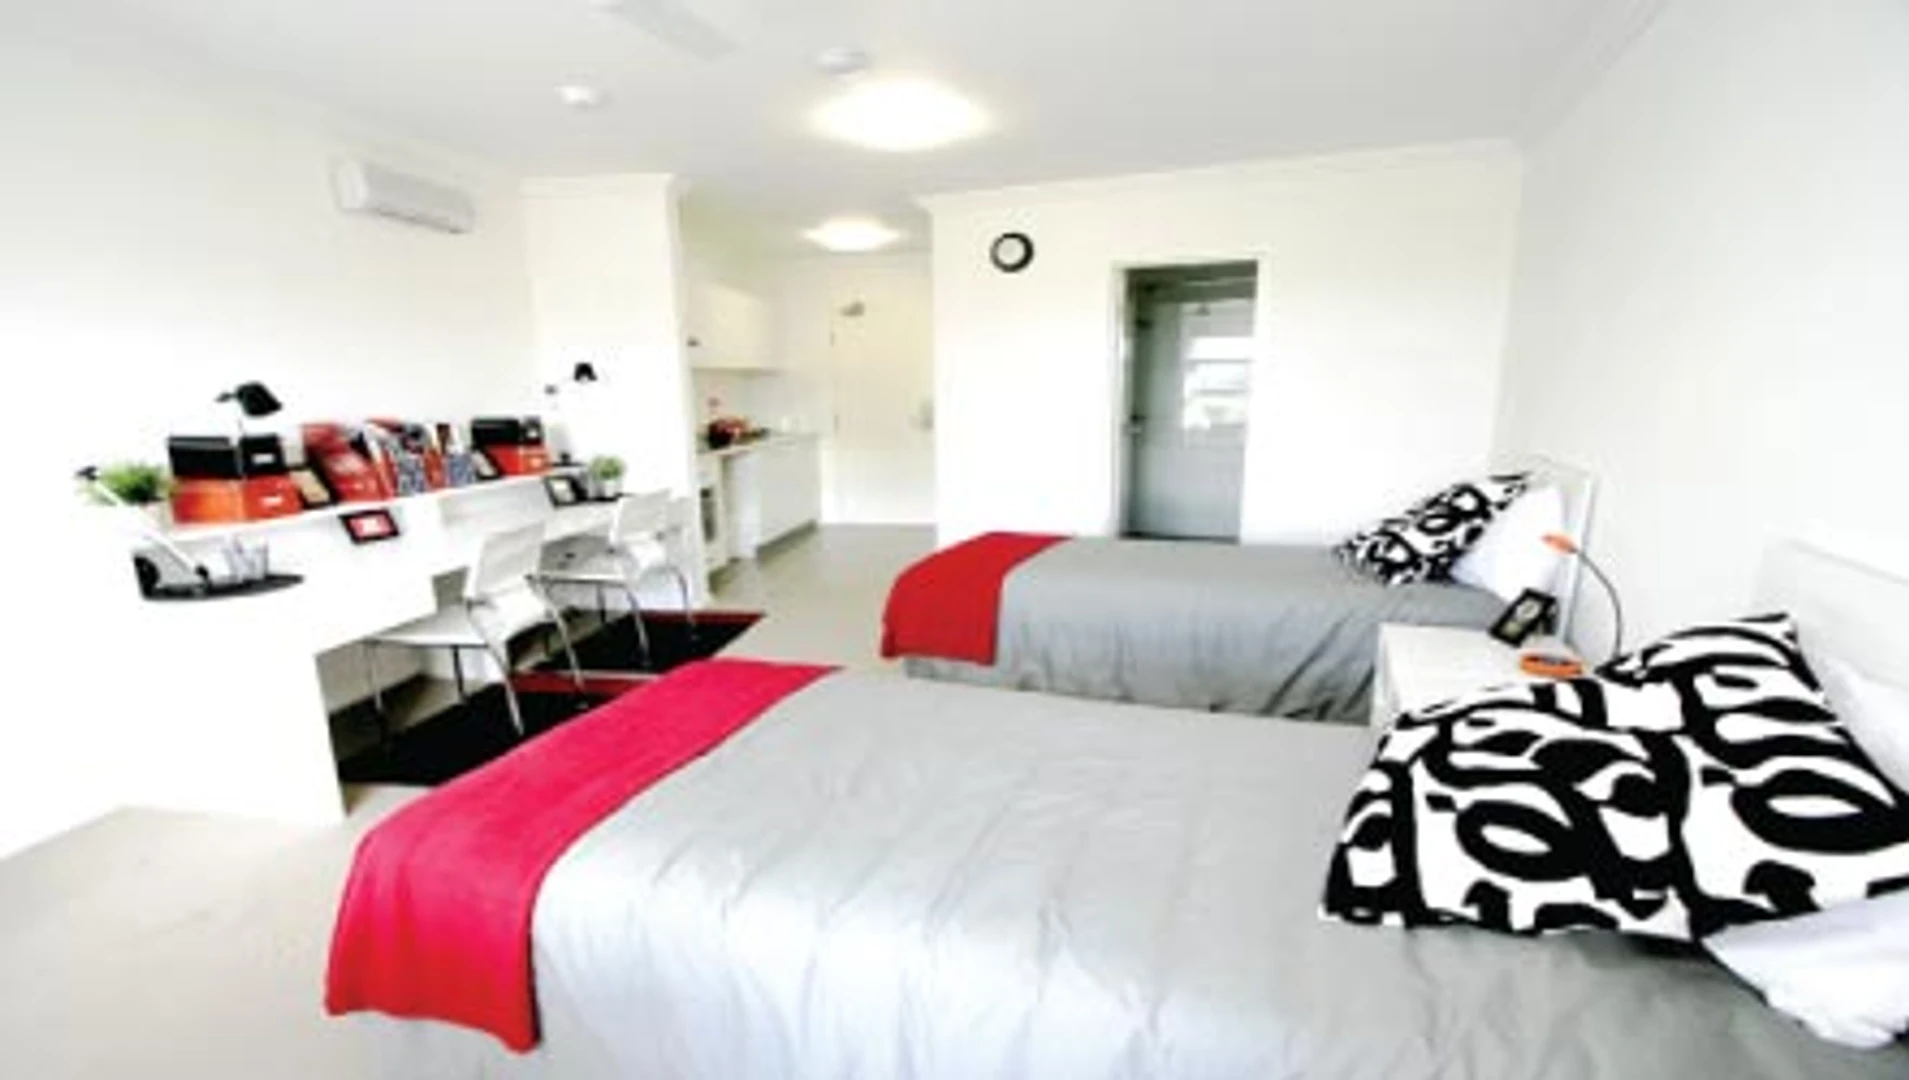 Accommodation in the centre of Canberra